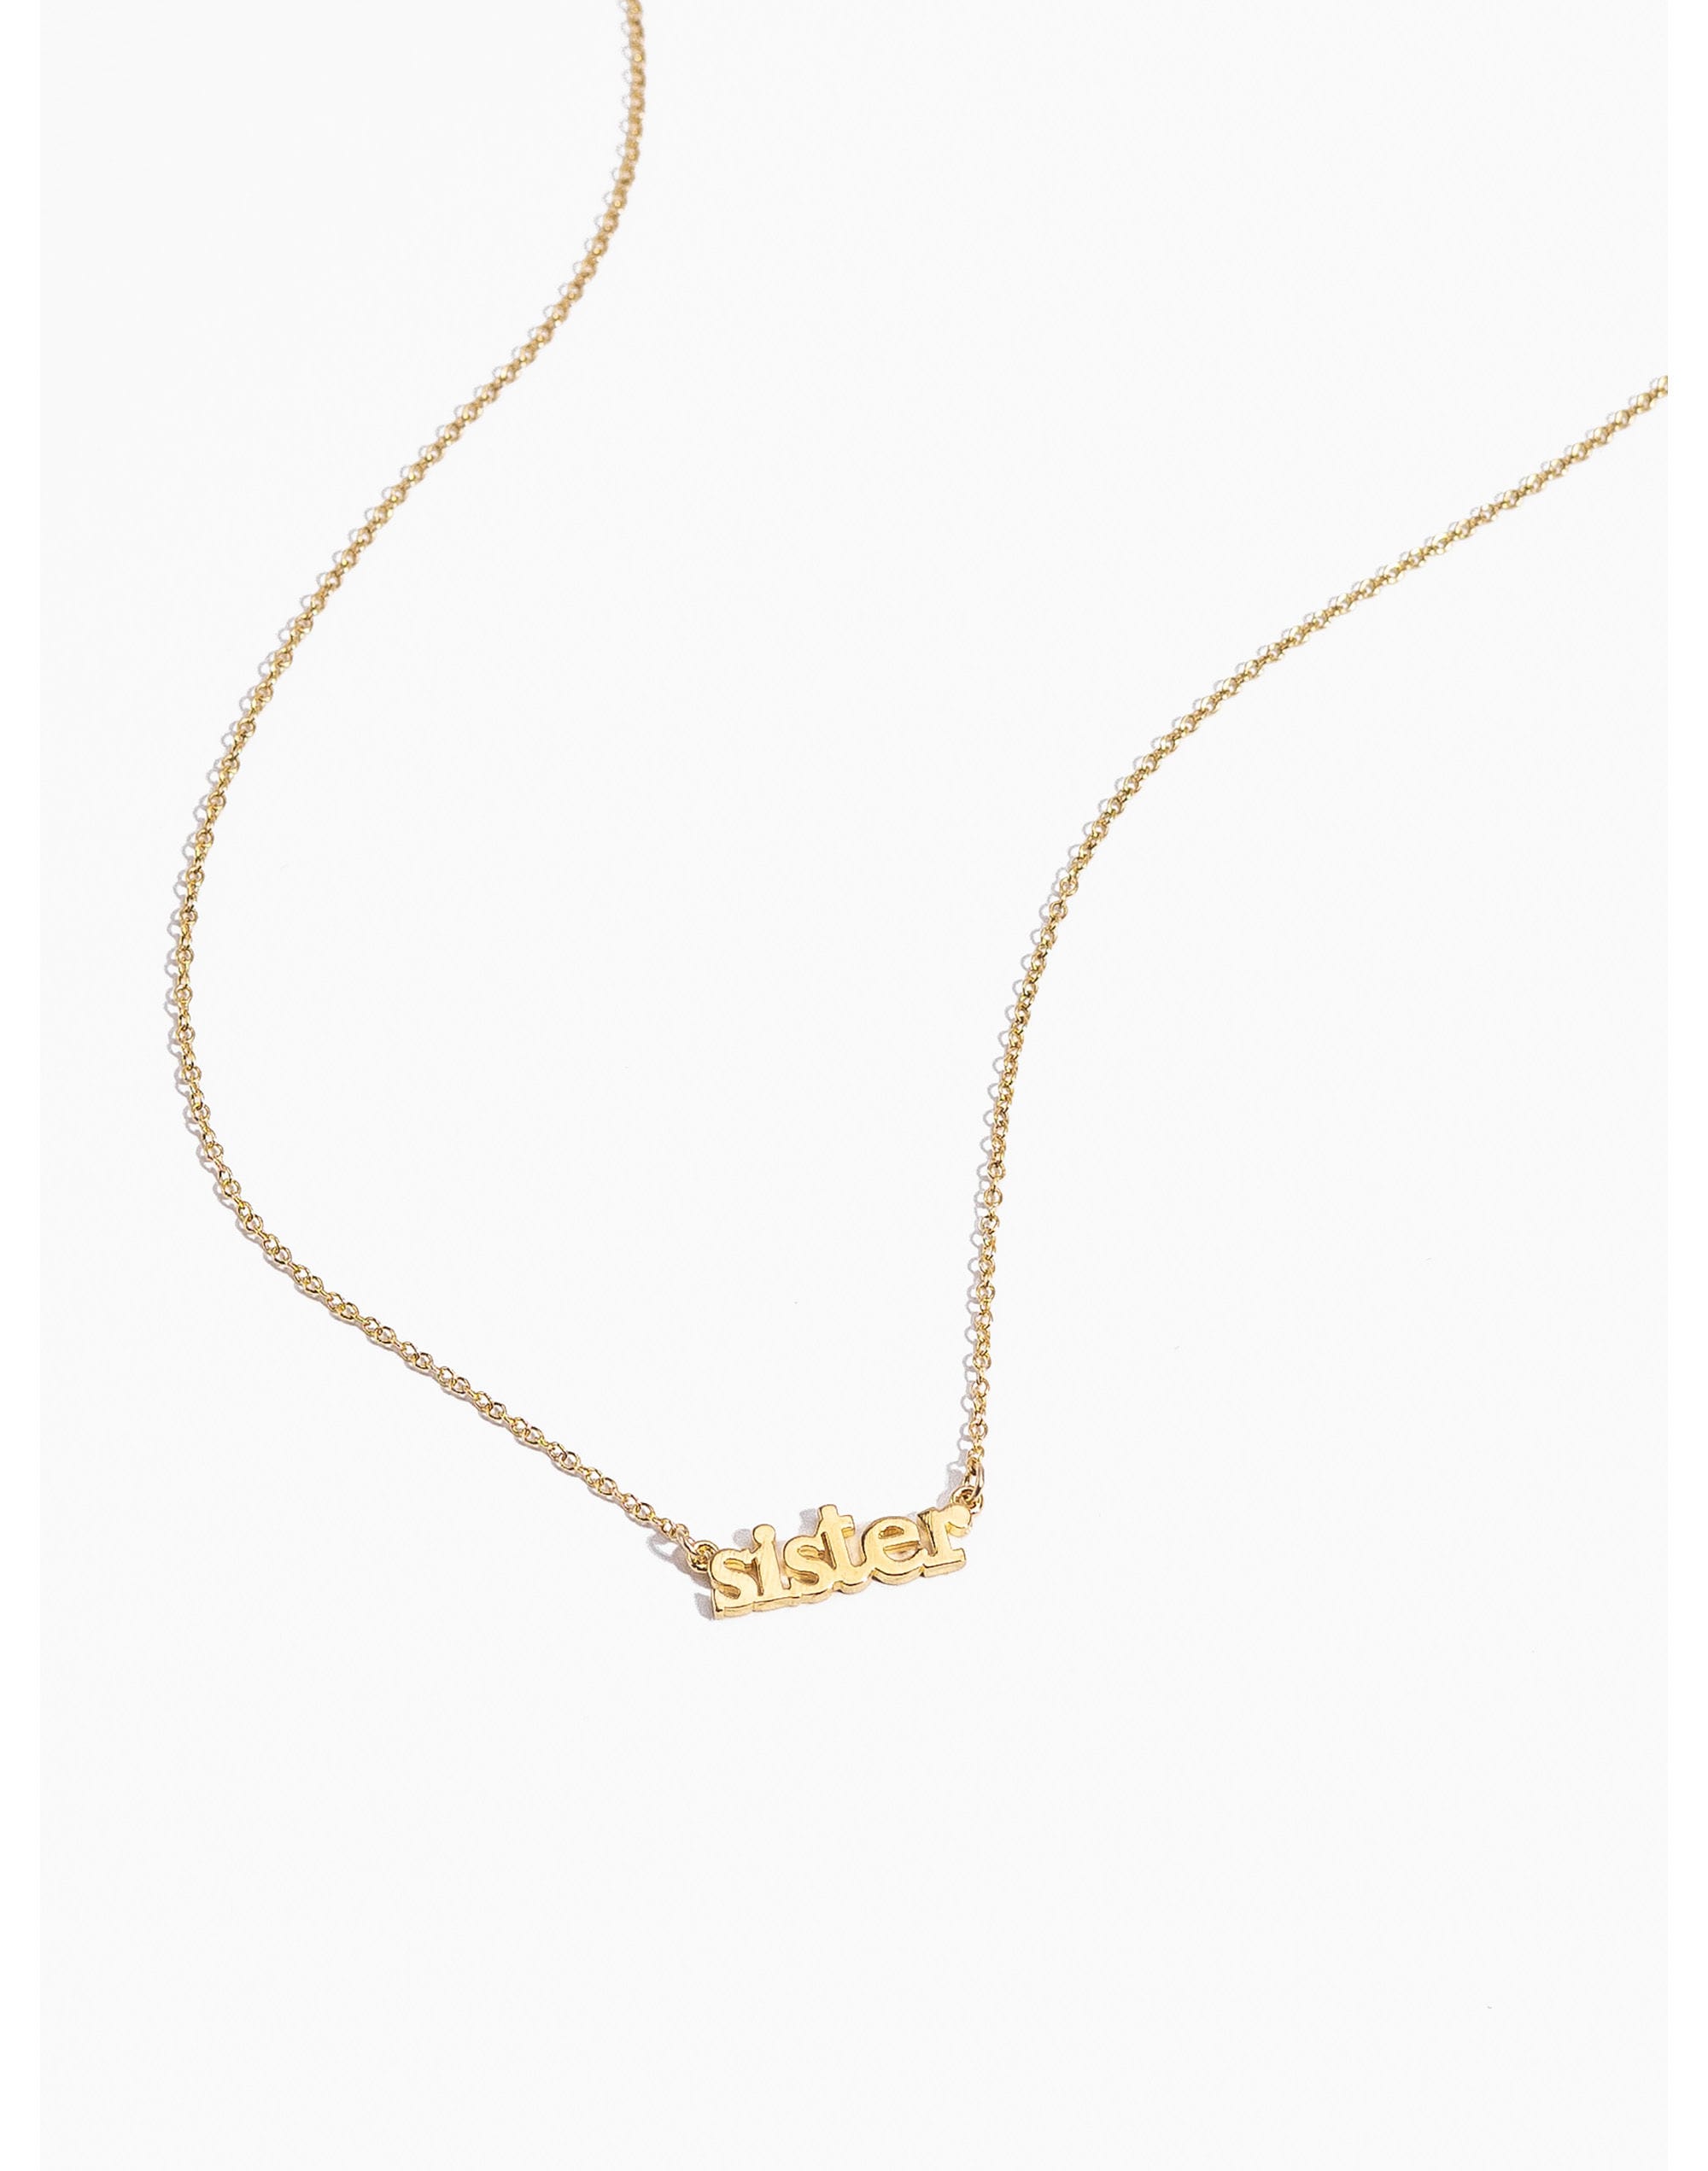 Katie Dean Jewelry™ Sister Necklace